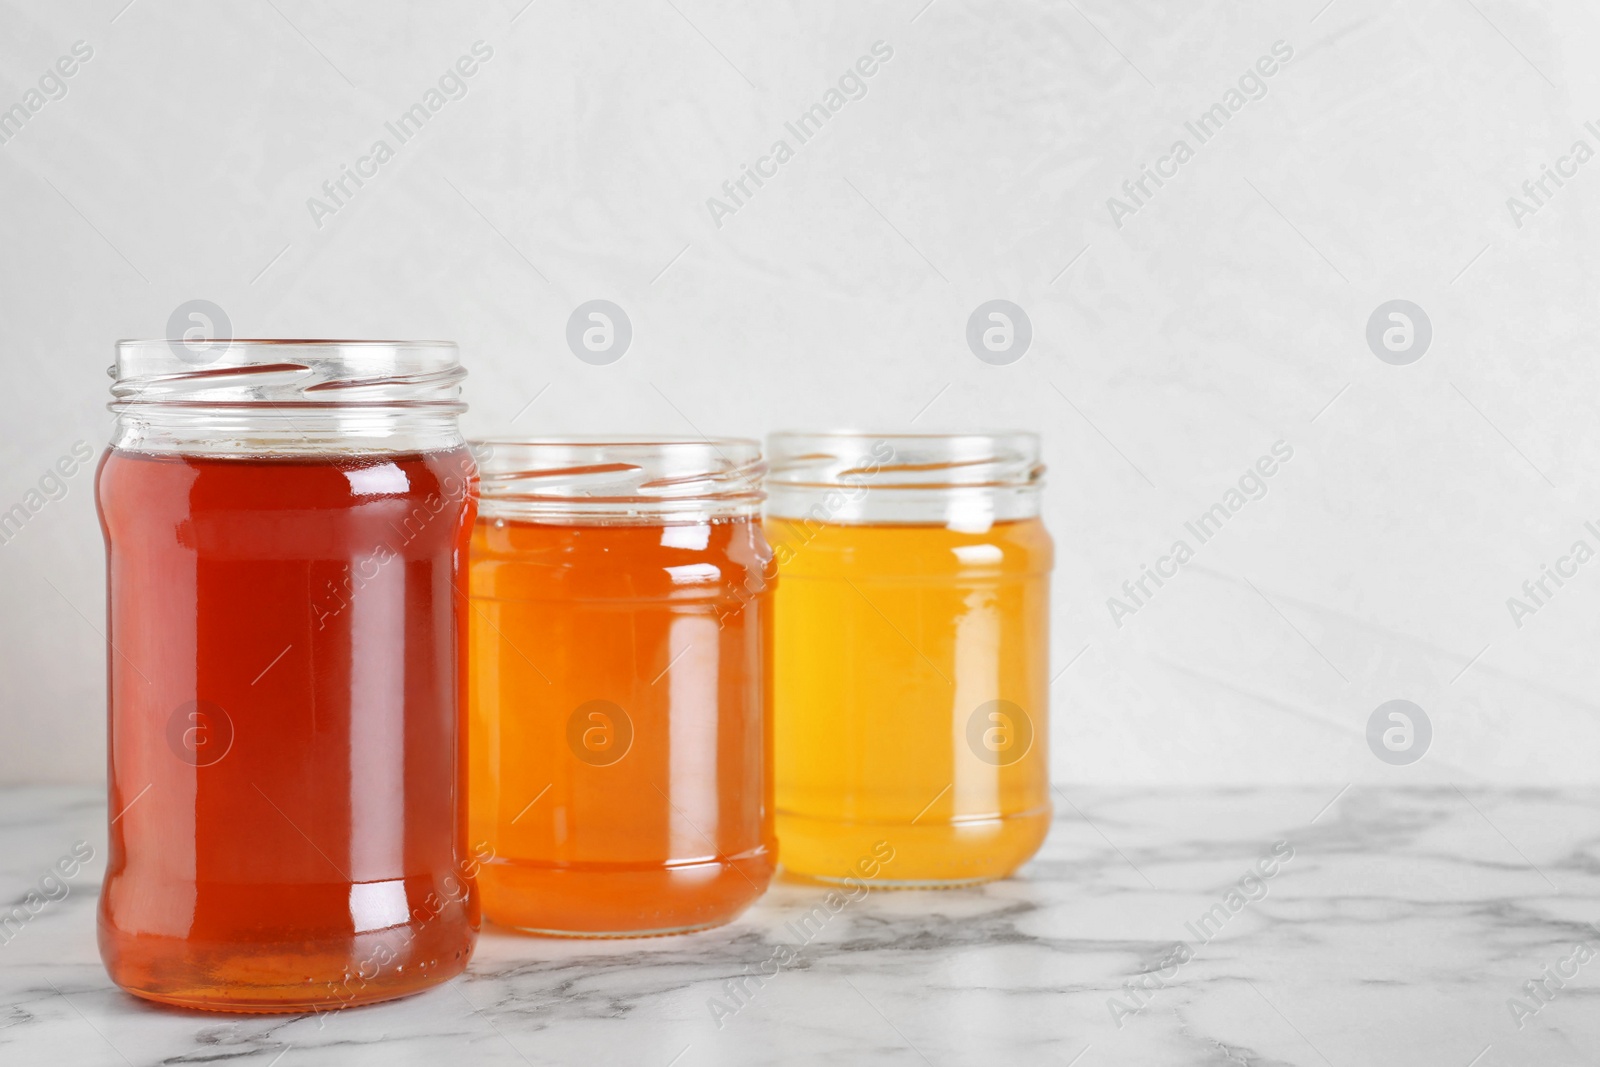 Photo of Jars with different types of organic honey on marble table against white background